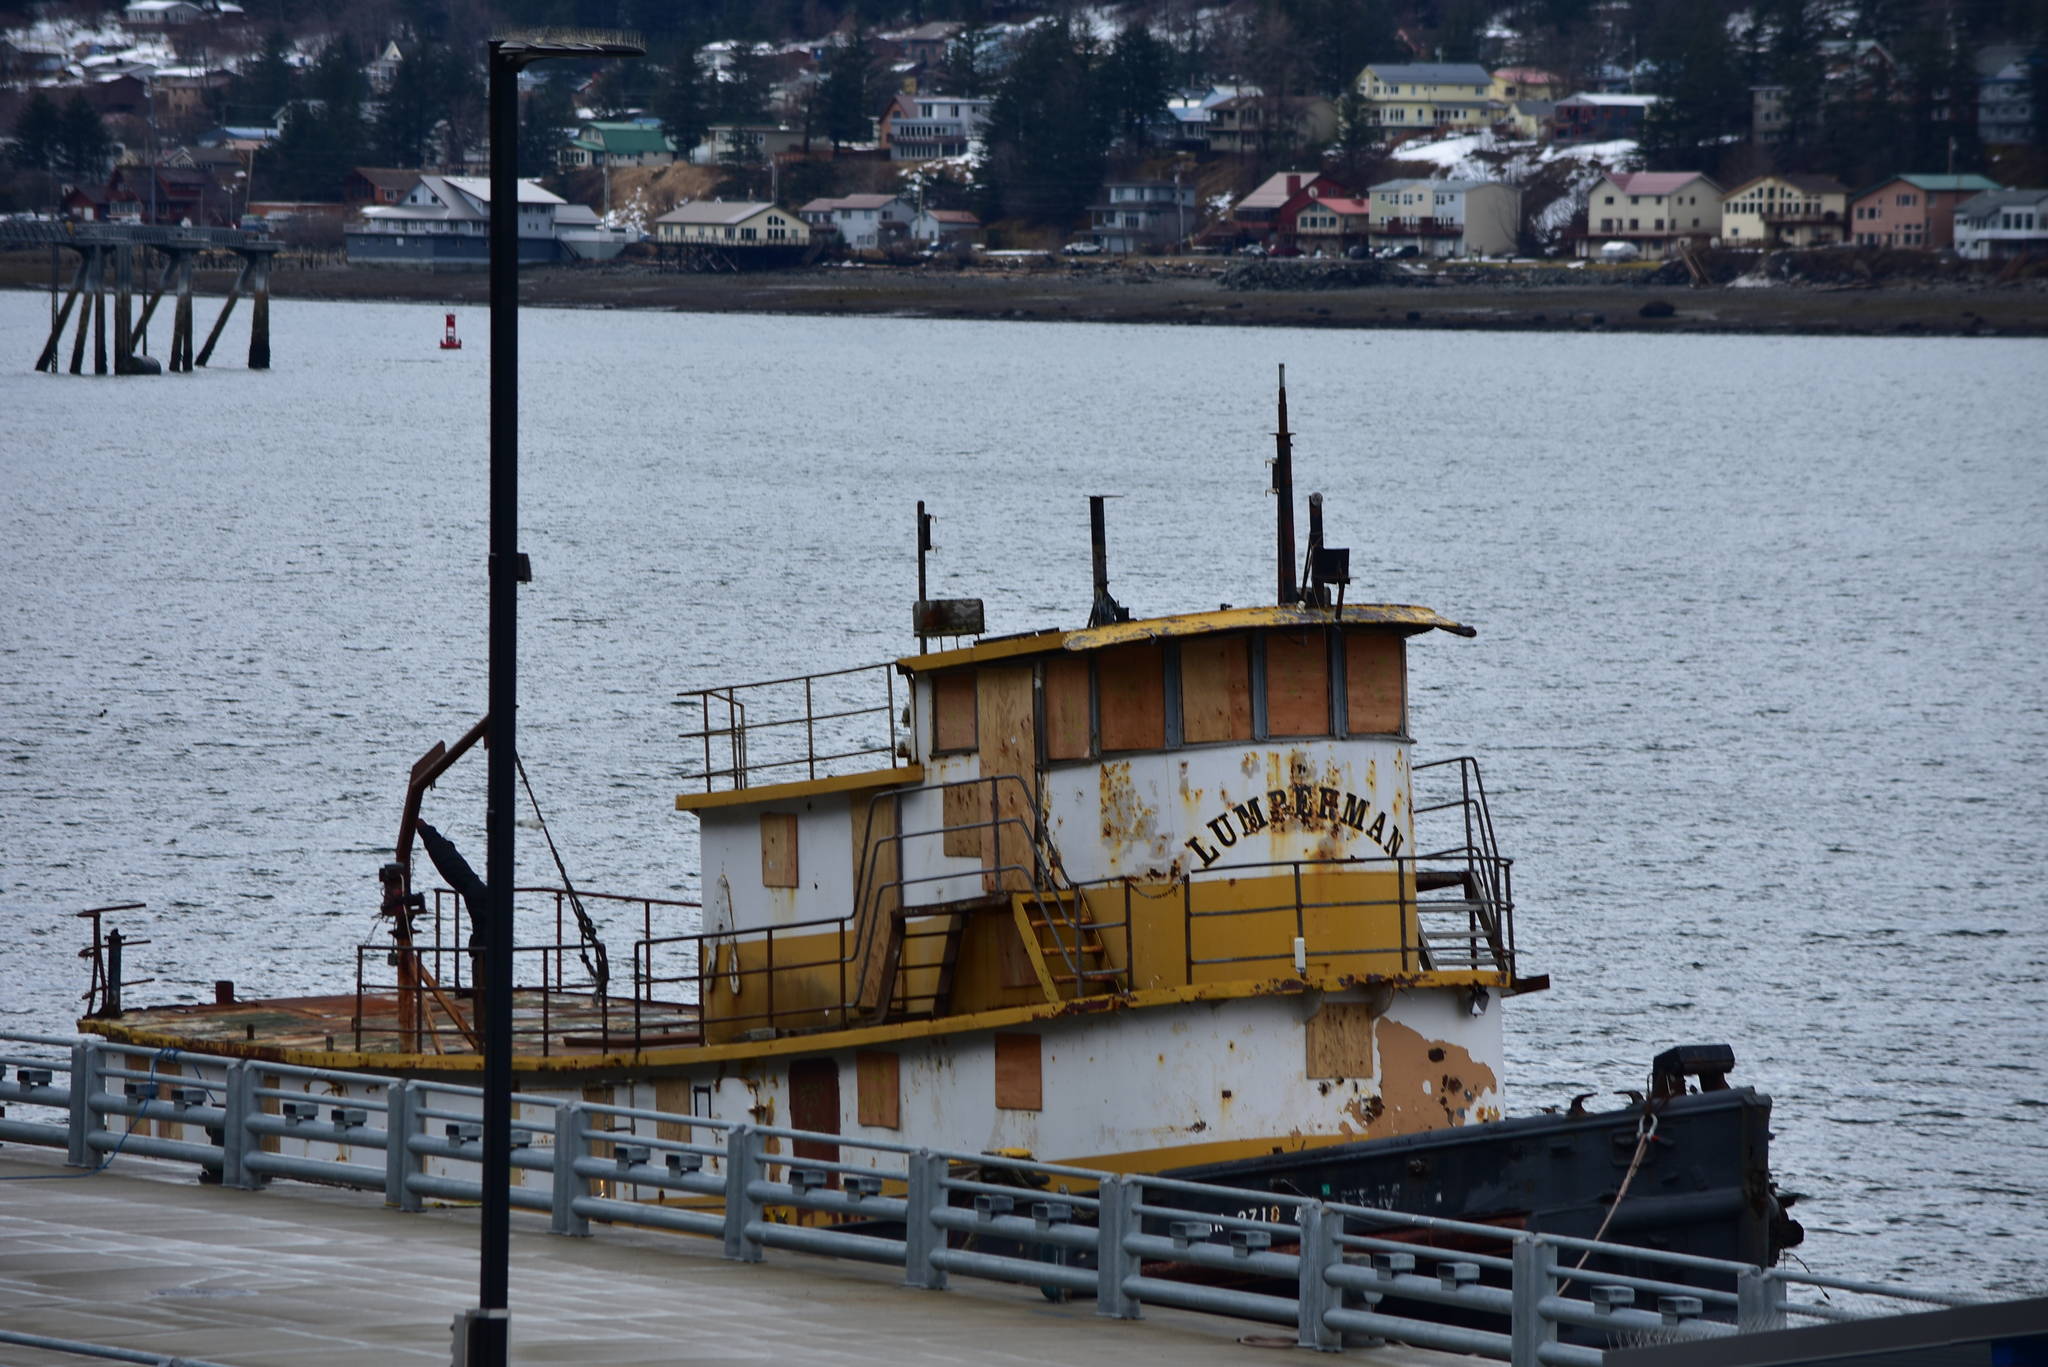 The Lumberman, shown here moored alongside the City and Borough of Juneau’s pier downtown, will be scuttled in the open sea when clear weather allows. (Peter Segall / Juneau Empire File)